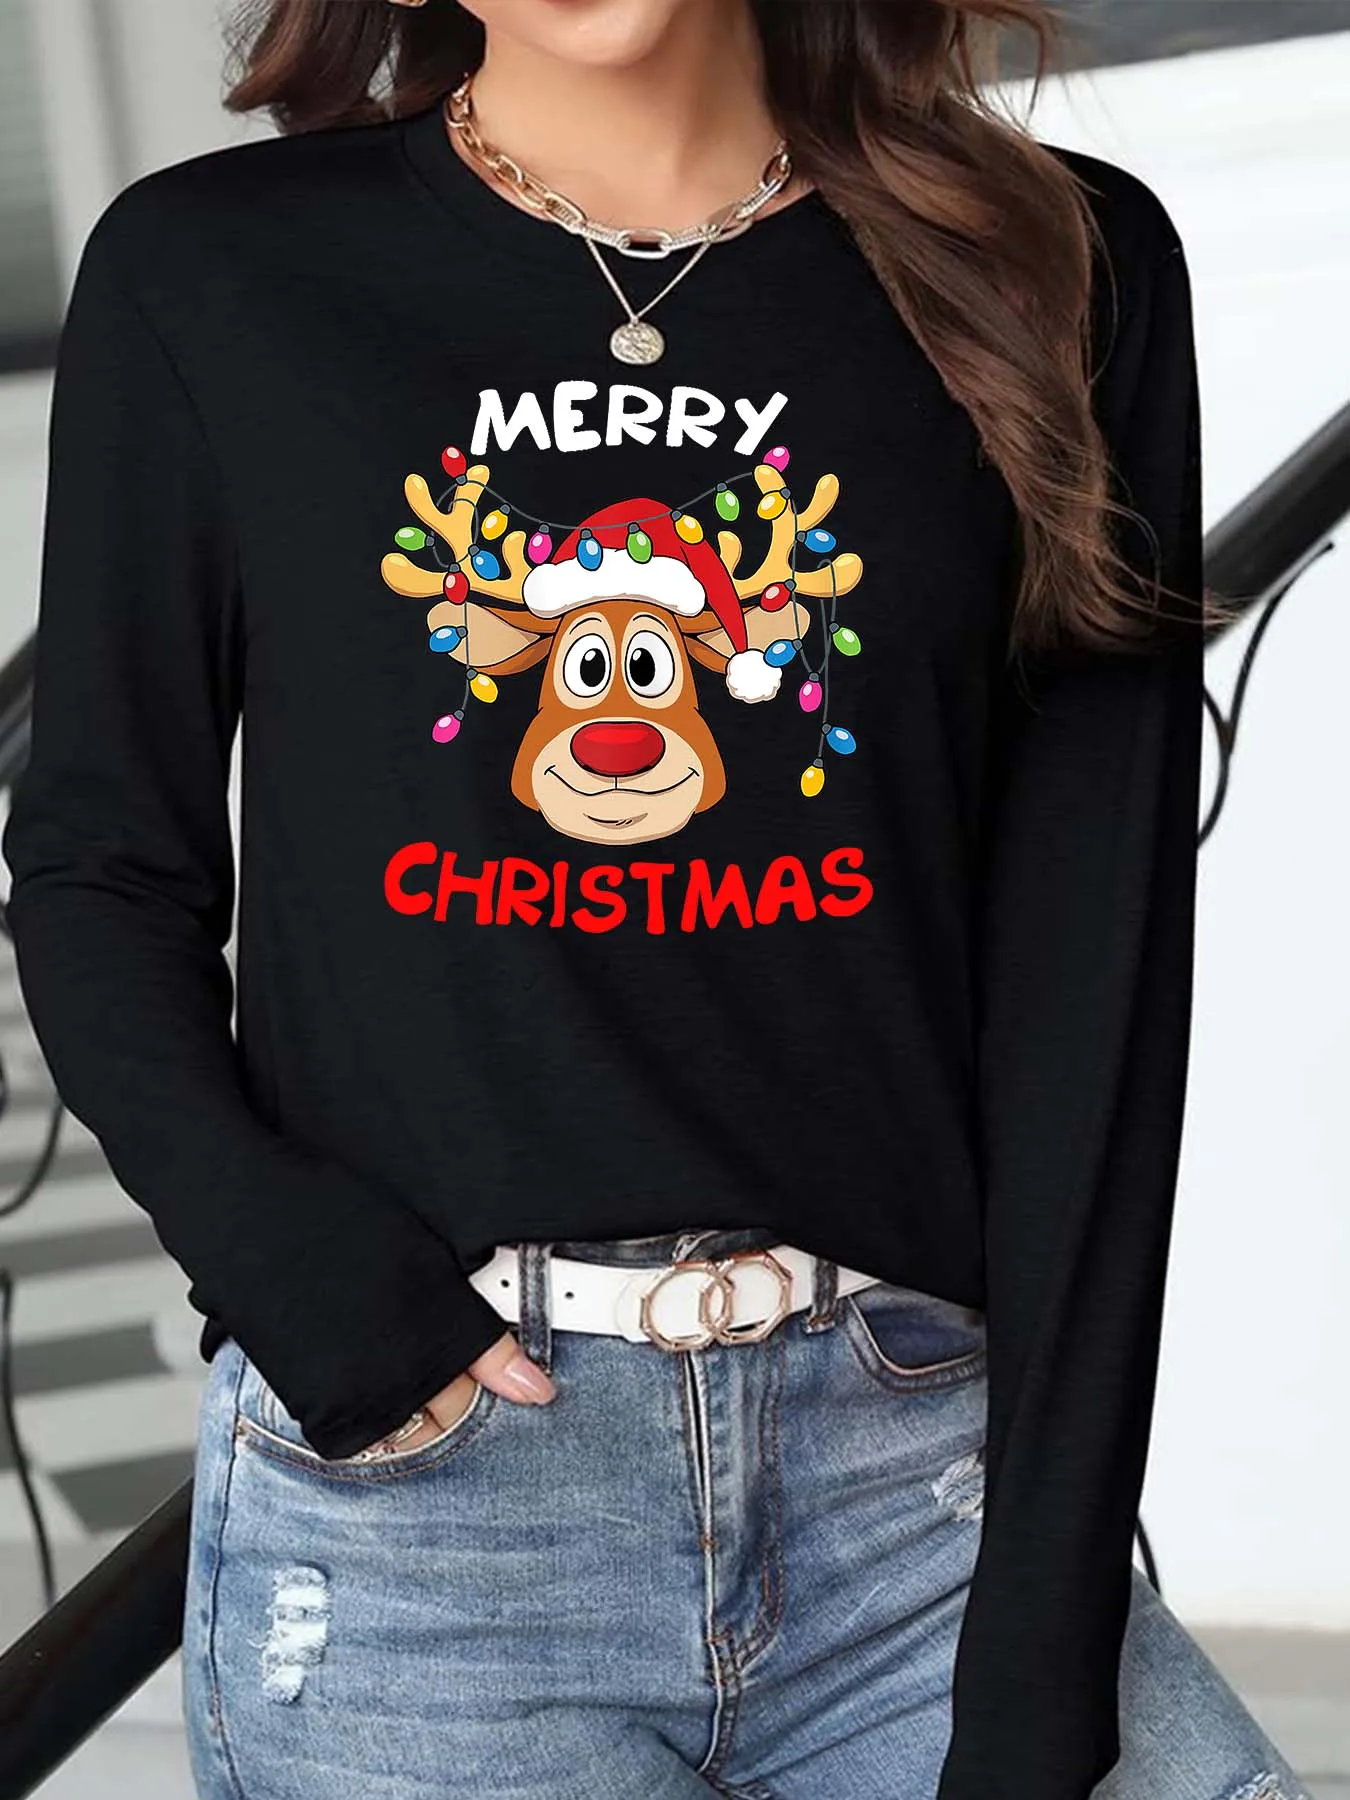 

Regular size Women's short sleeve T-shirt Cute Christmas lights moose print, round neck, multiple colors, sizes S to 2XL